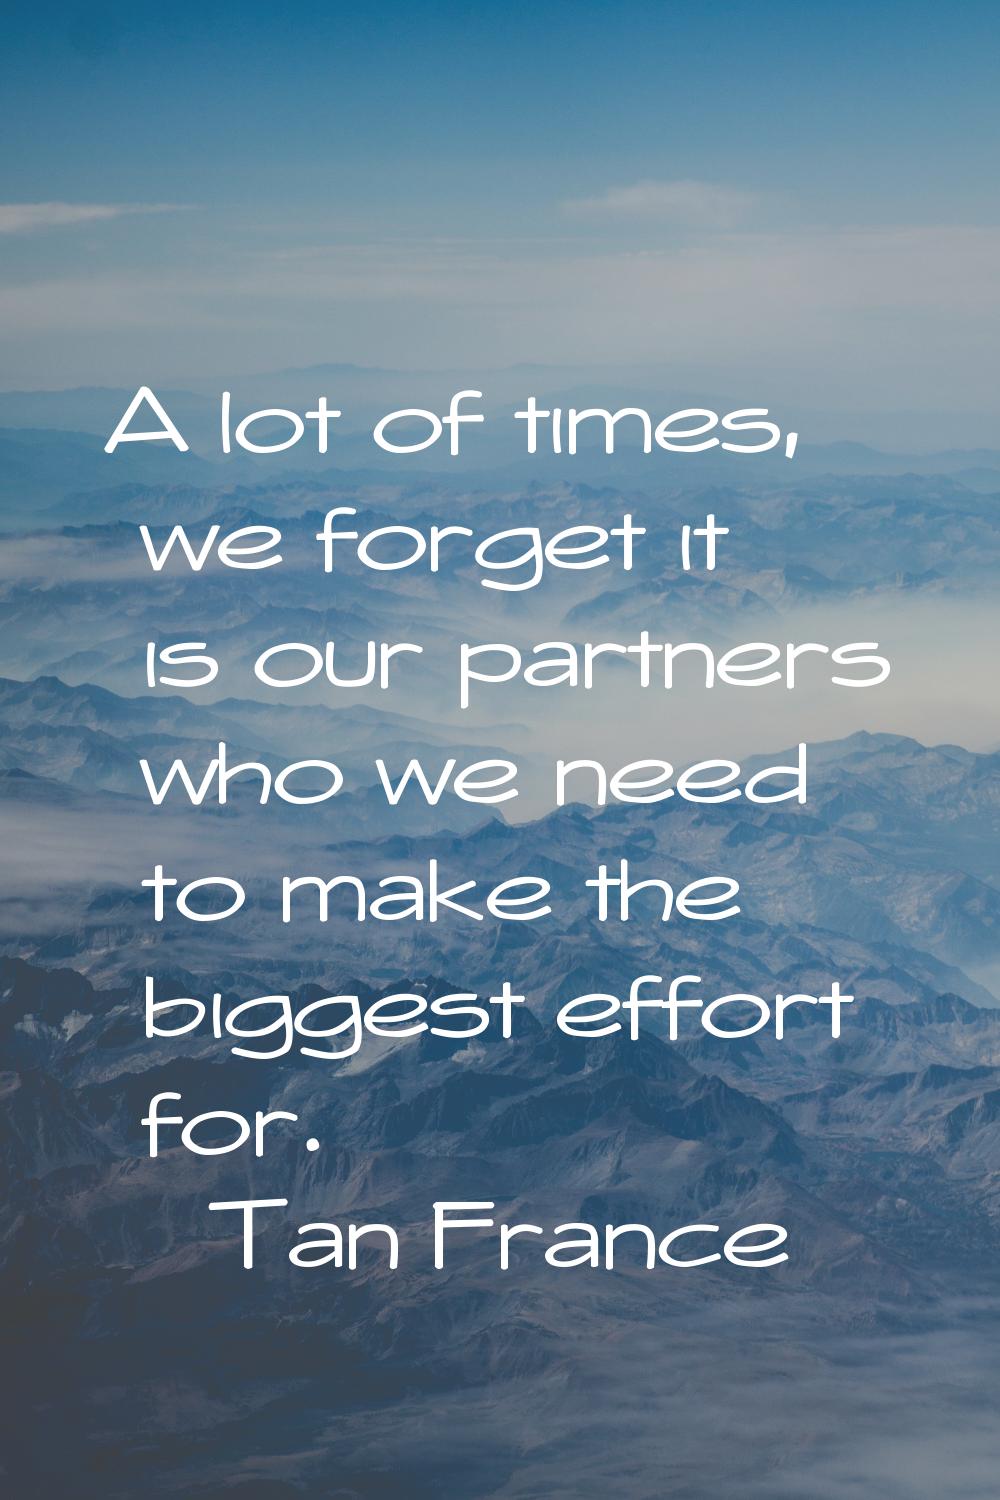 A lot of times, we forget it is our partners who we need to make the biggest effort for.